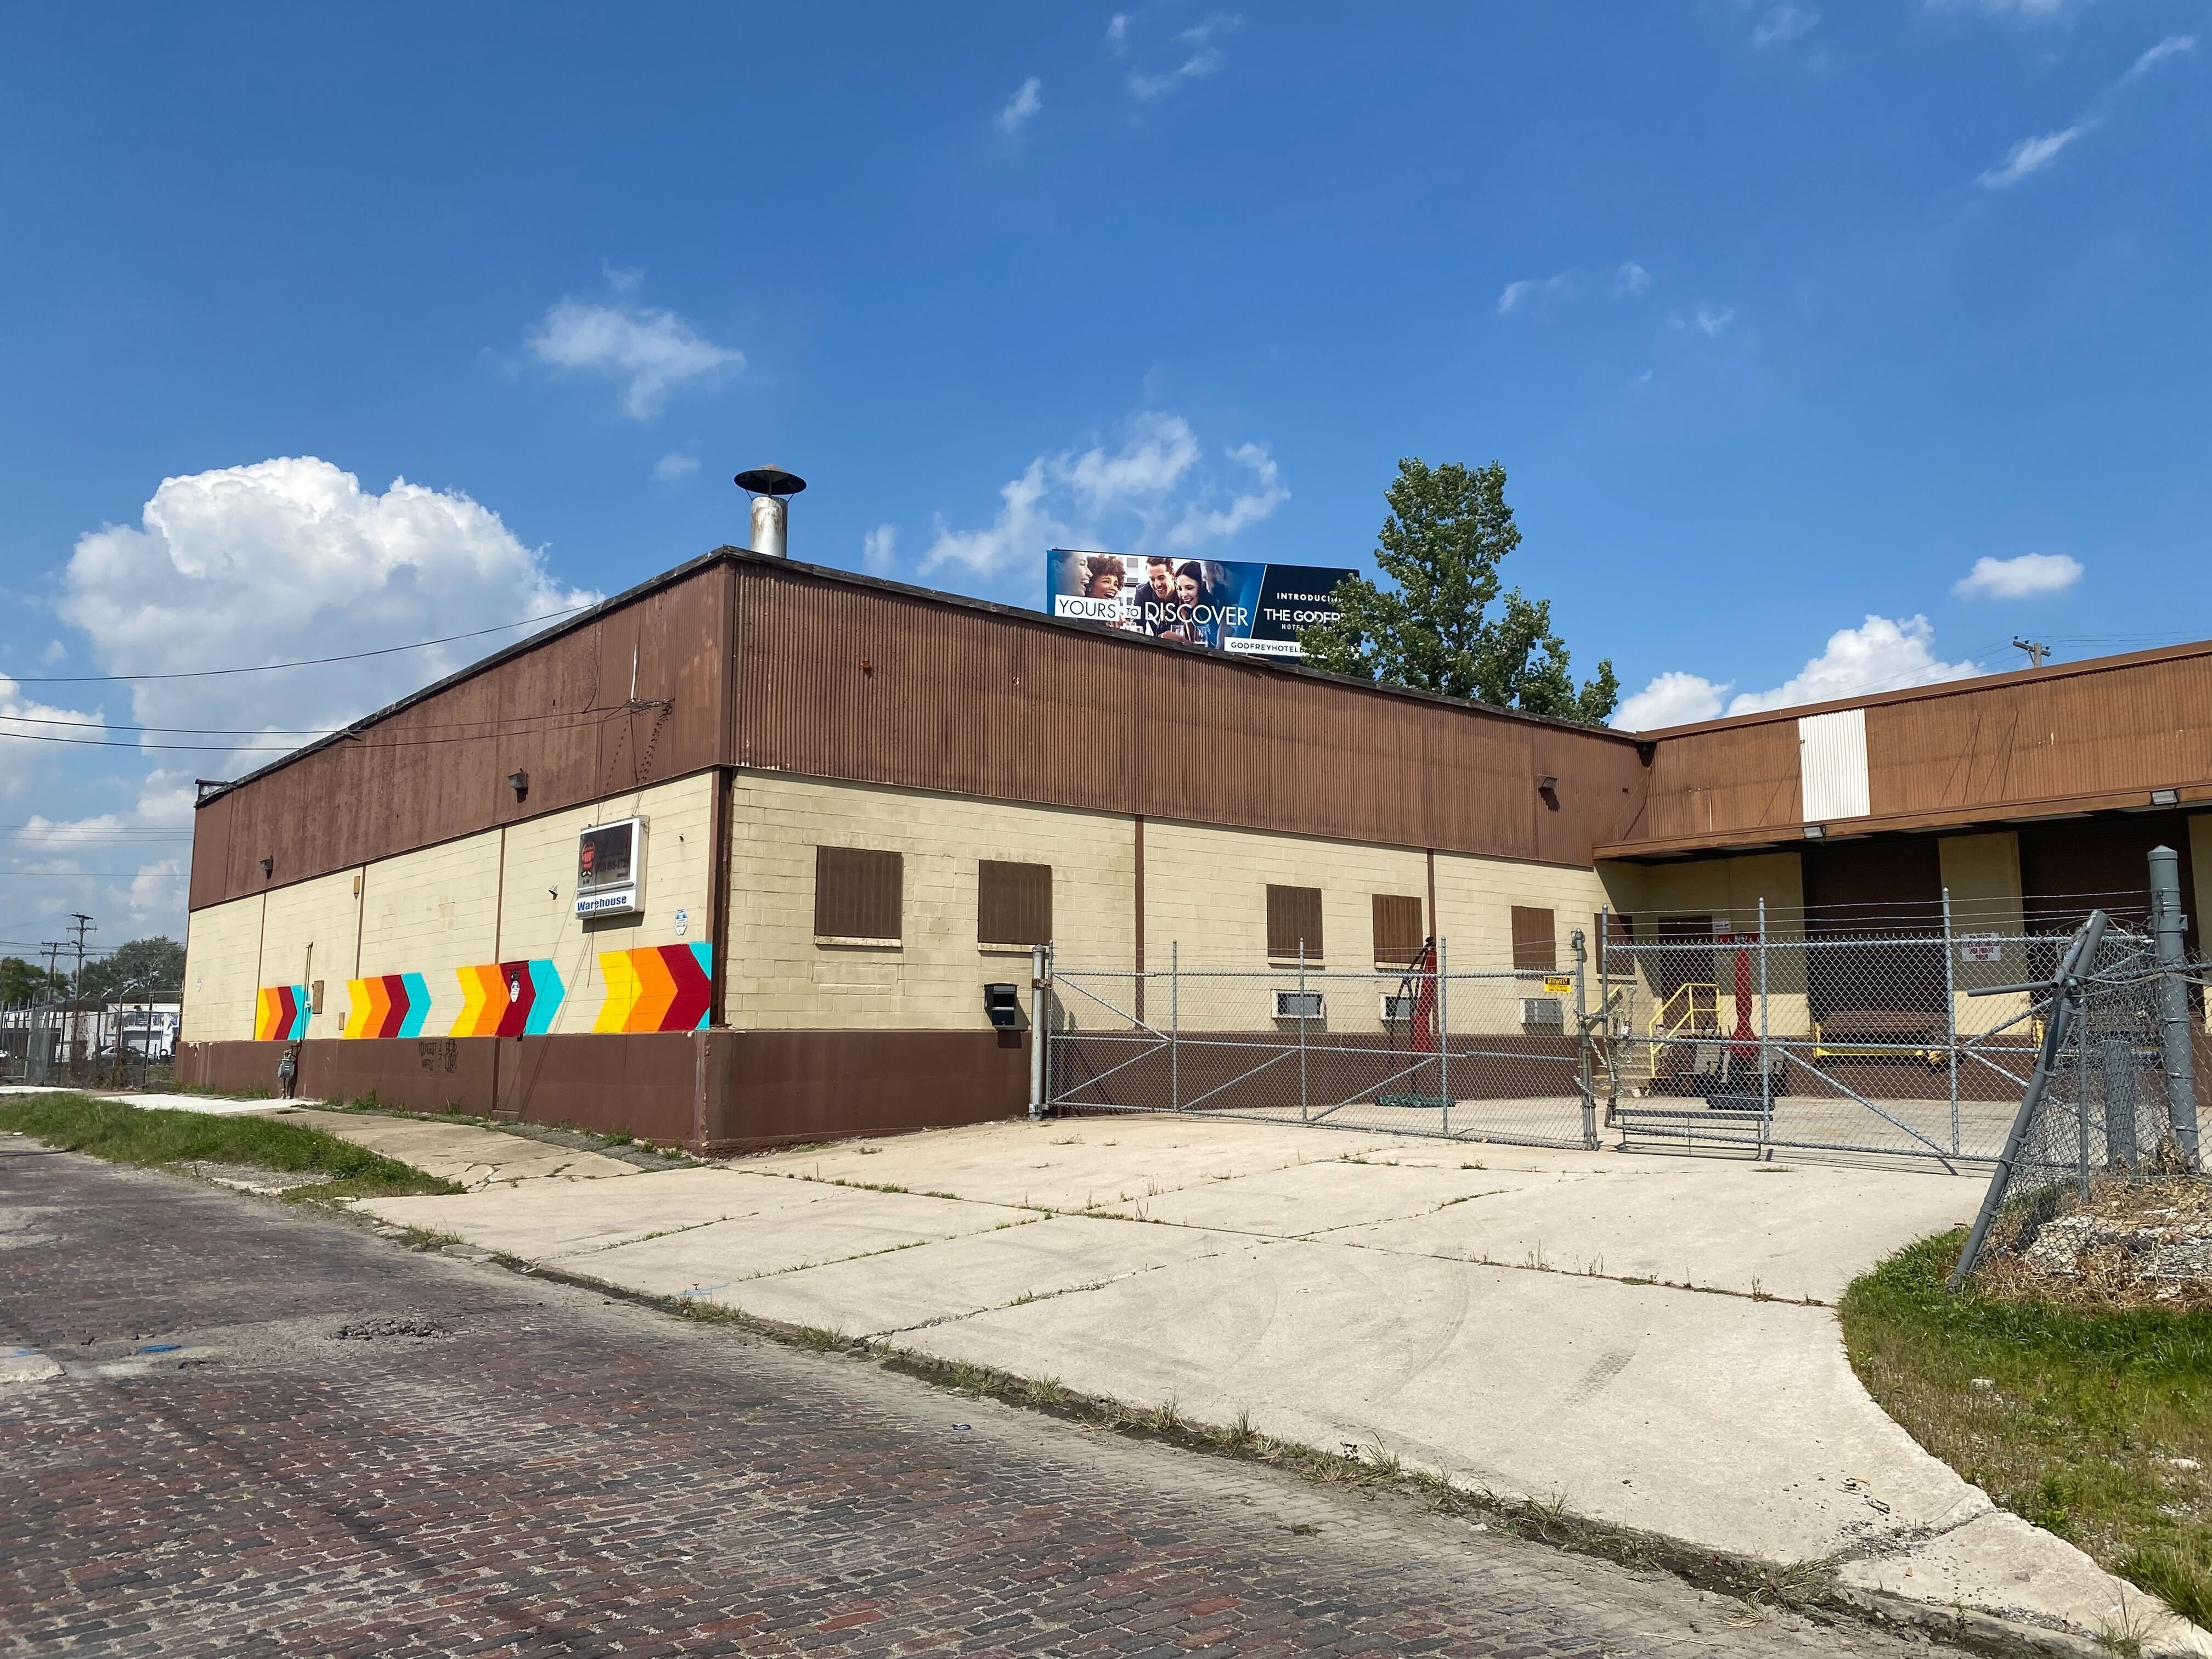 The 15,000-square-foot building that could be used for cannabis at 2530 22nd St. in southwest Detroit. 